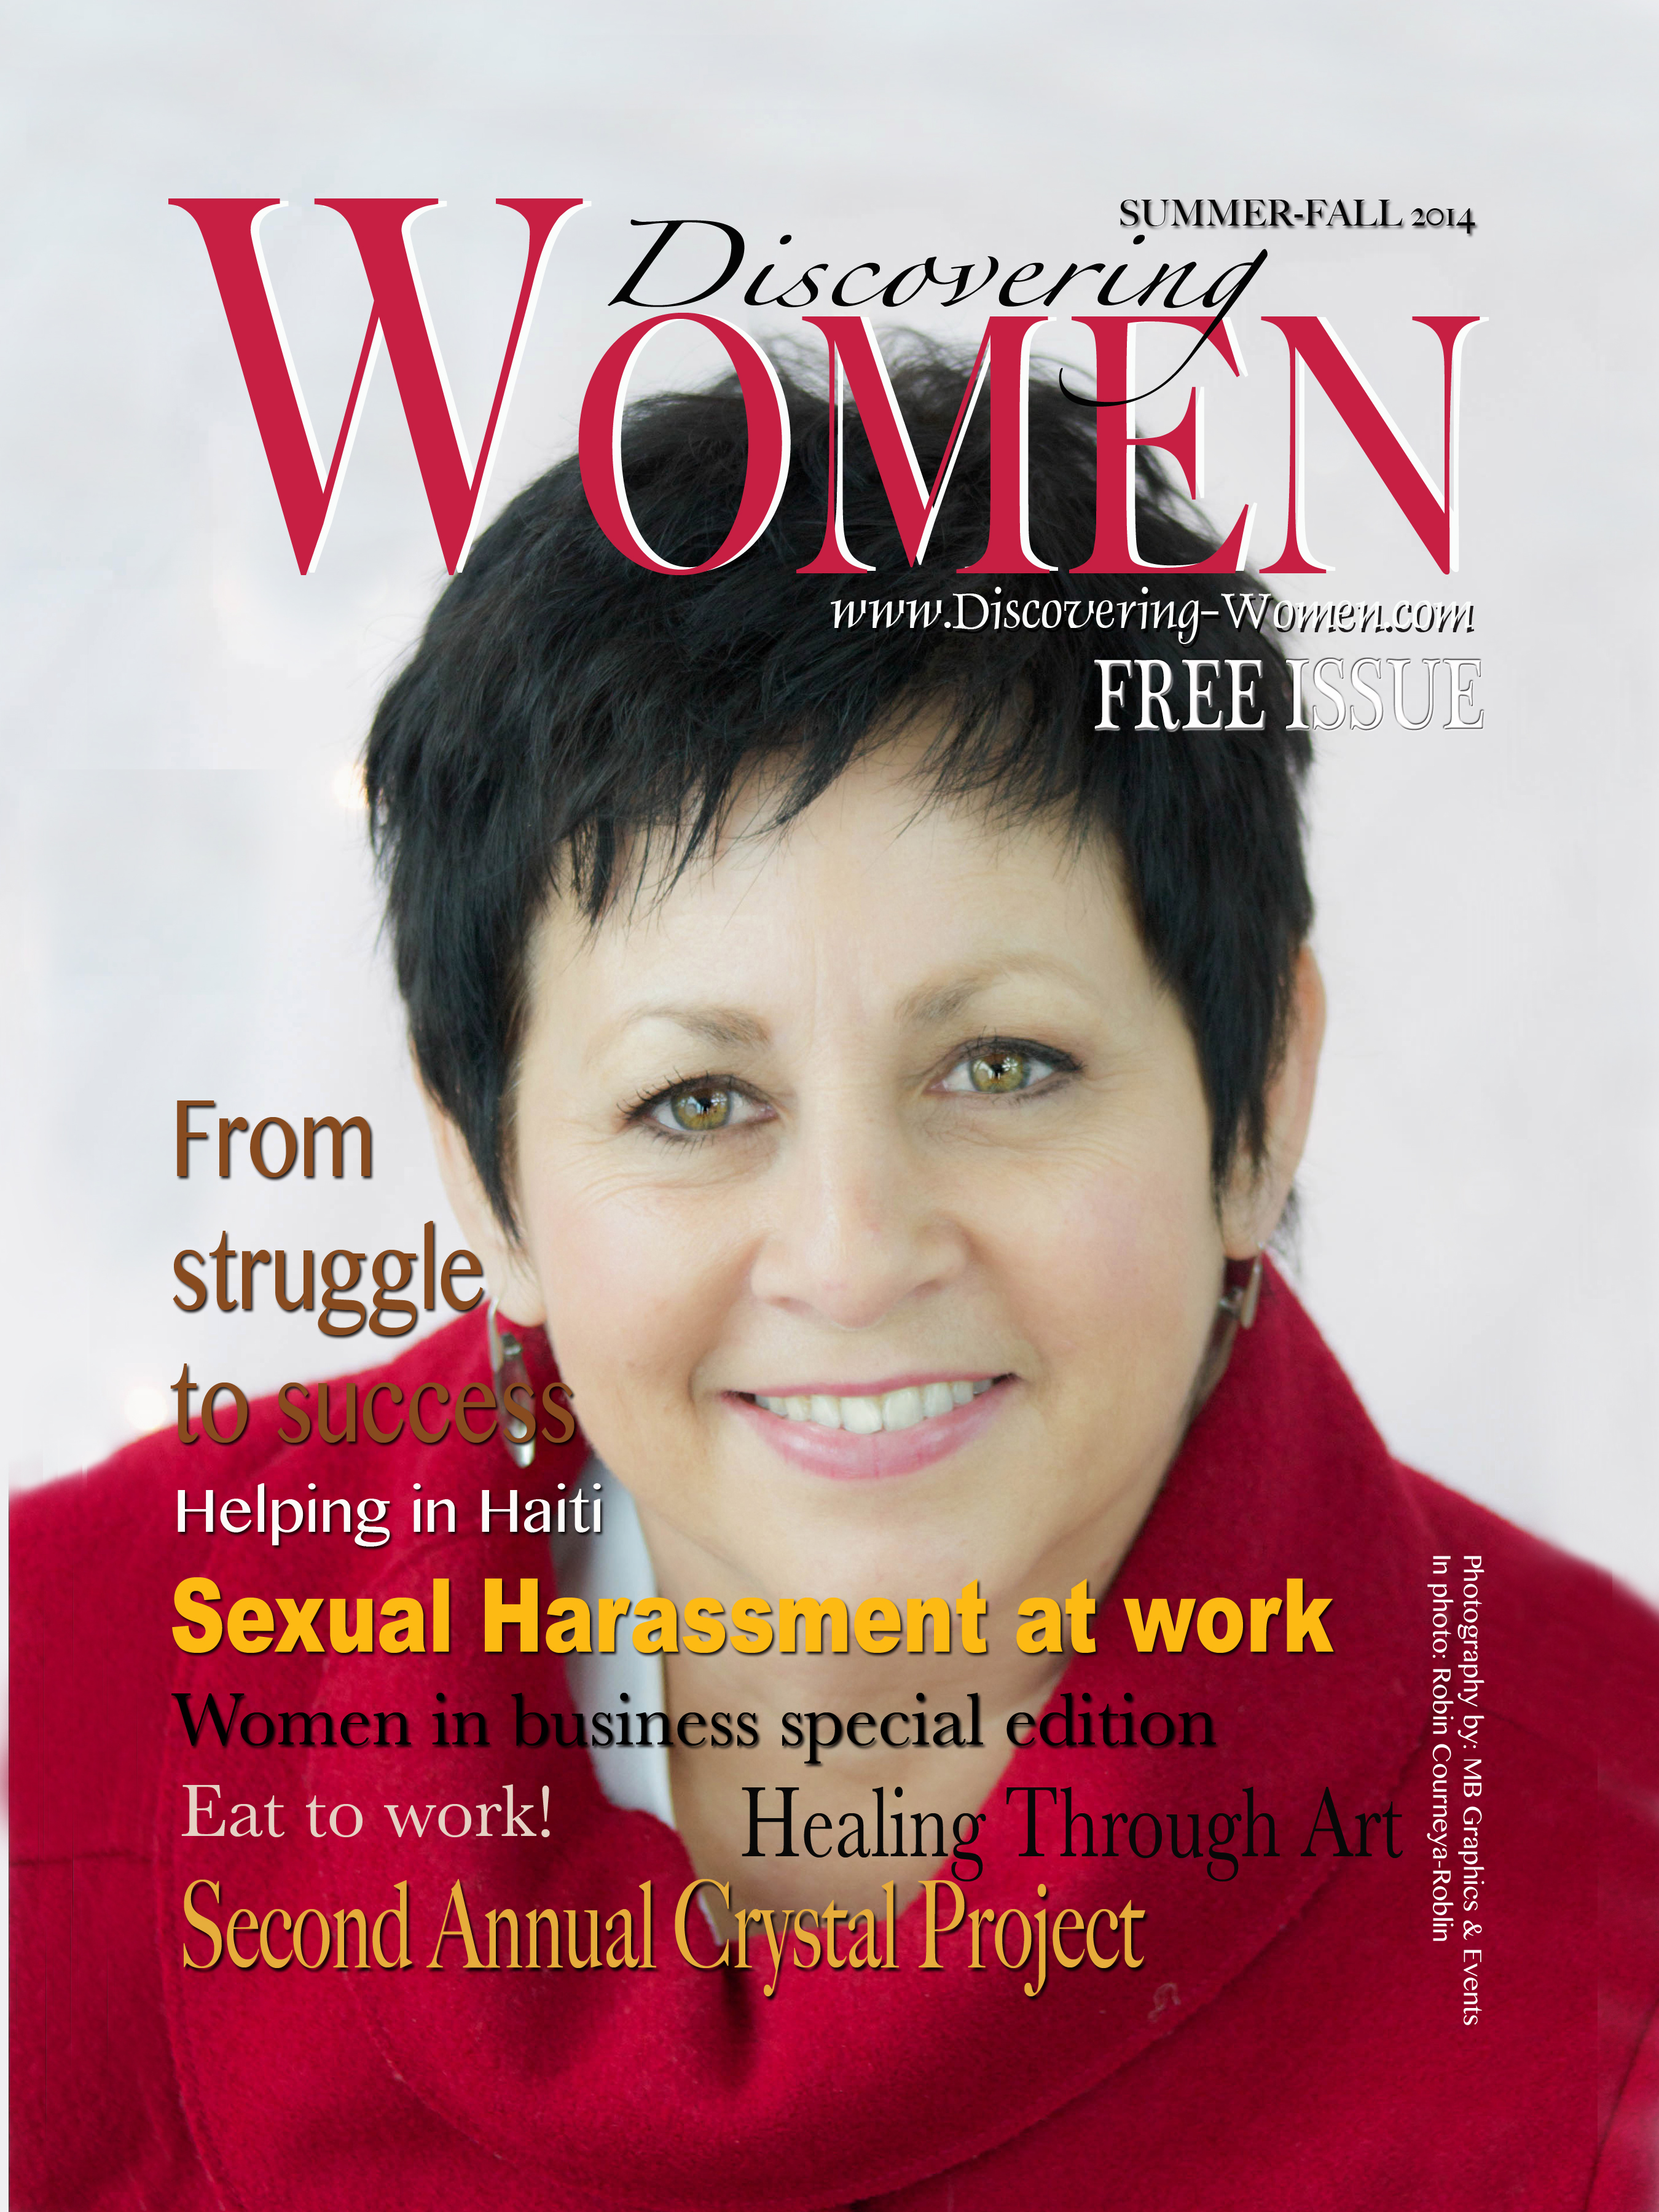 Summer- Fall 2014 "Women in Business Special Edition"